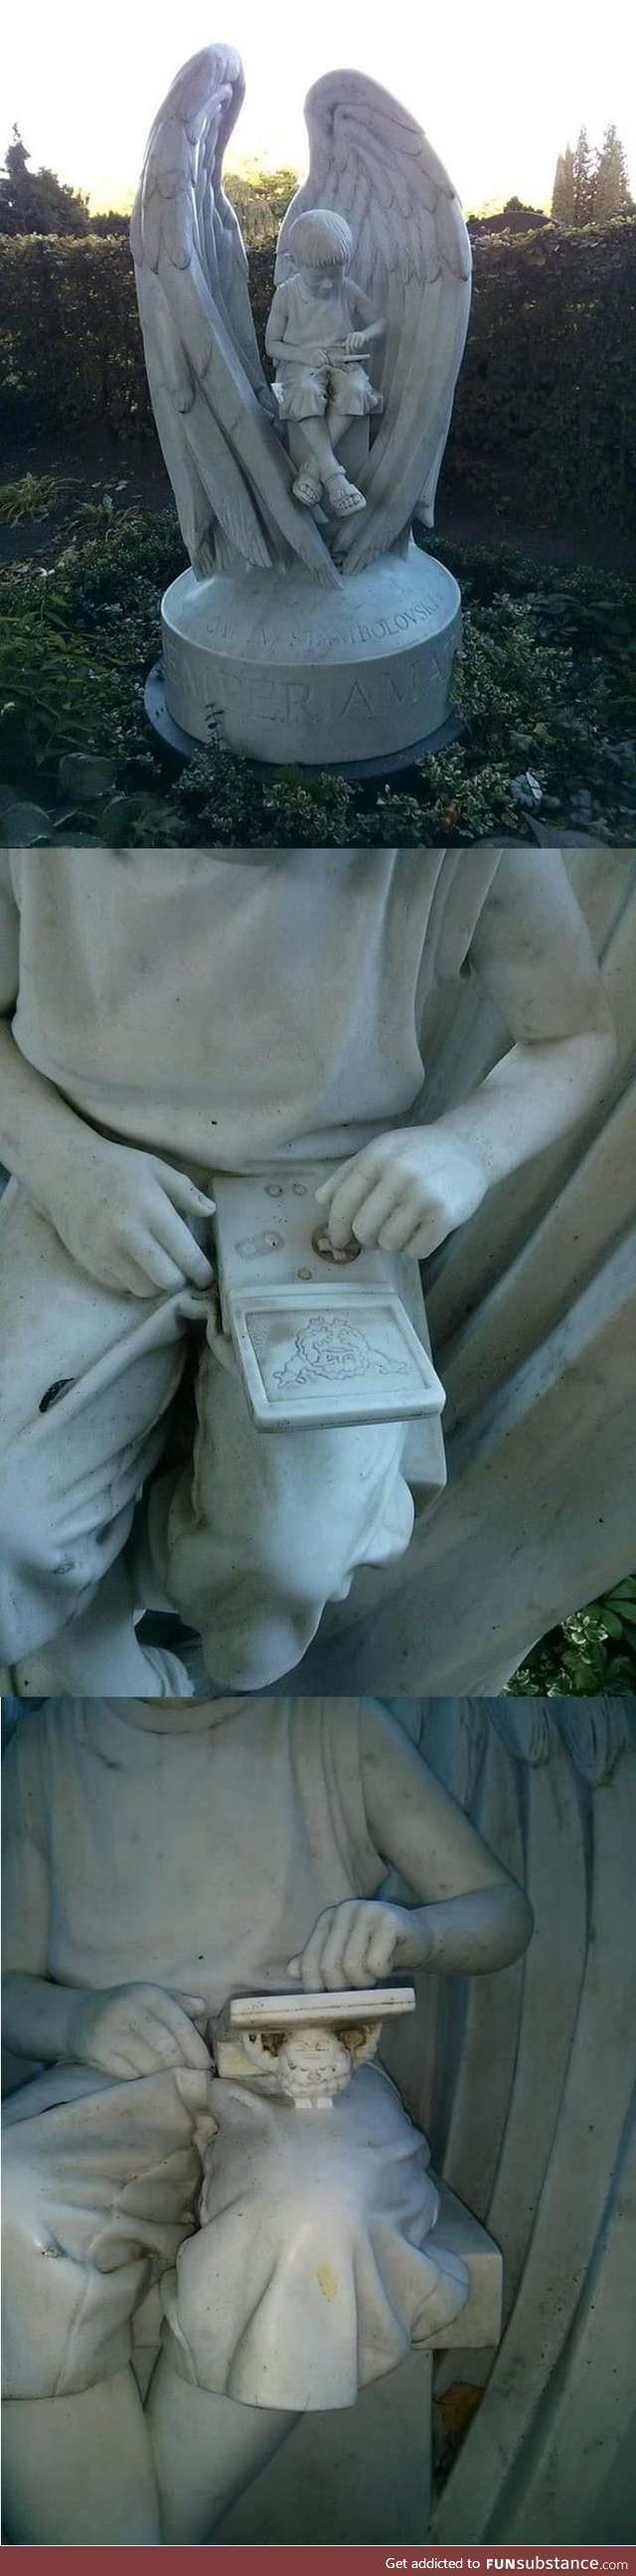 The Cemetery of Lund, Sweden, houses a headstone representing a child playing